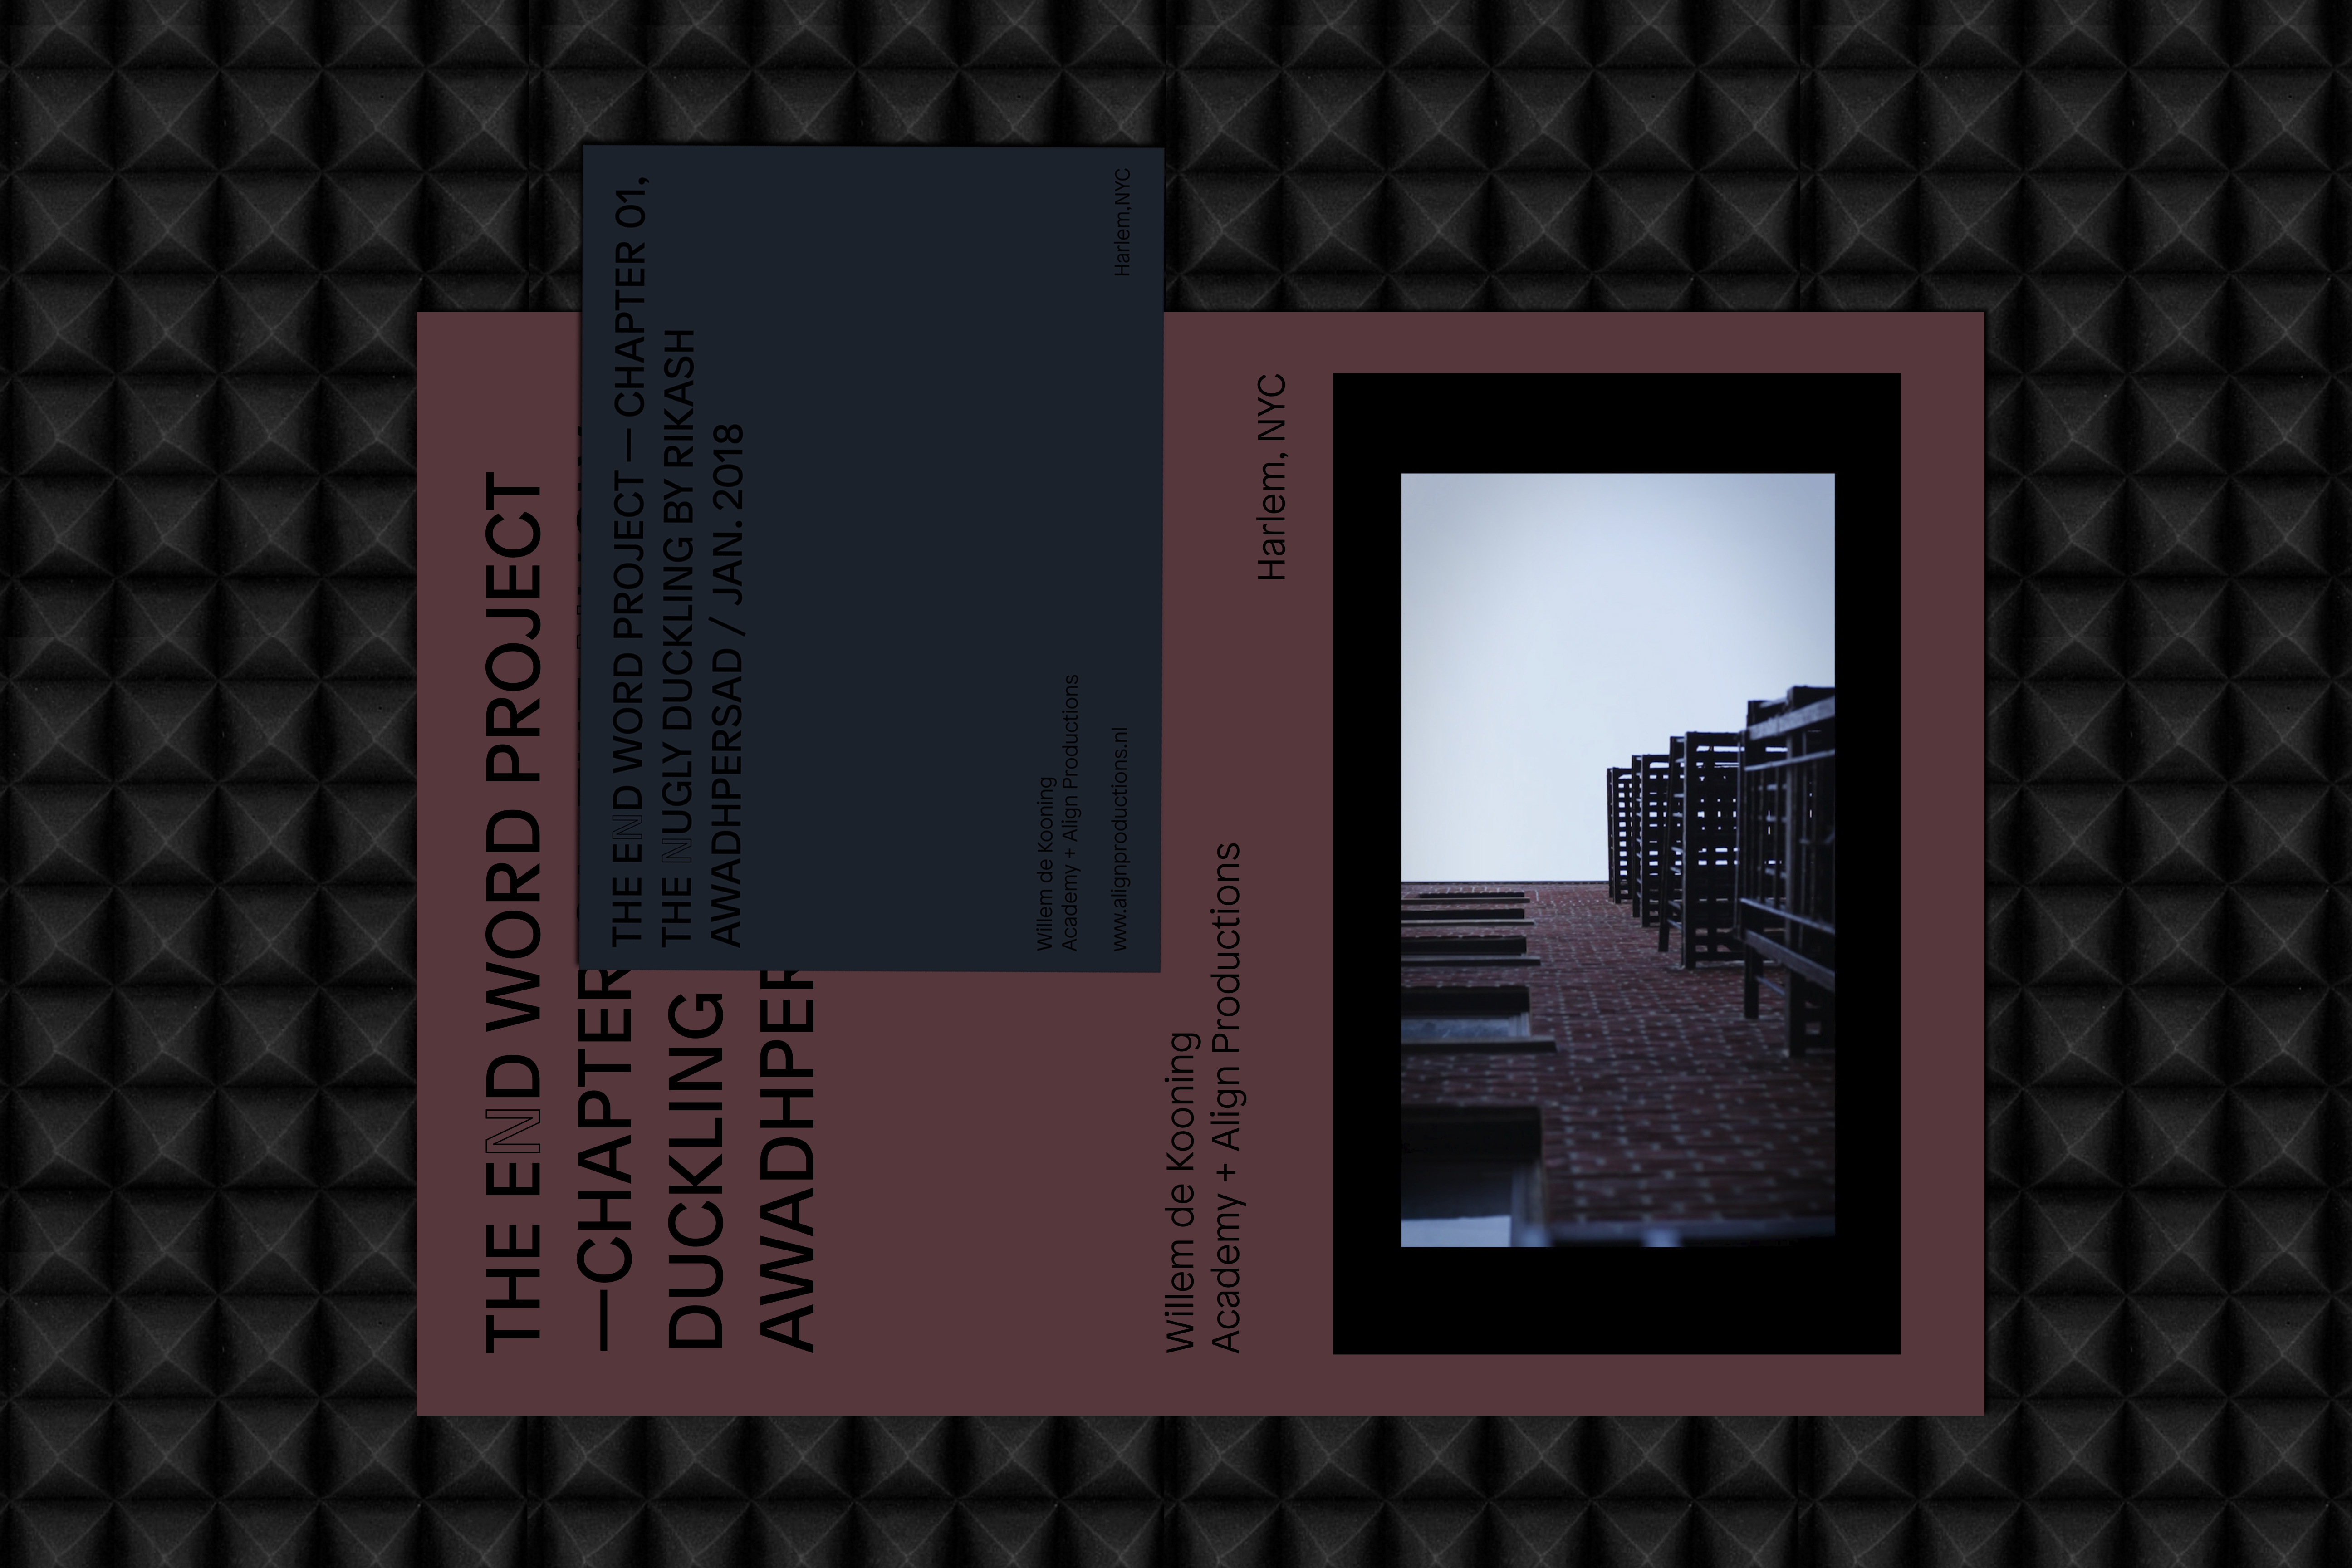 http://julienbaiamonte.com/content/1-projects/the-end-word-project/tnd_flyers_020.jpg